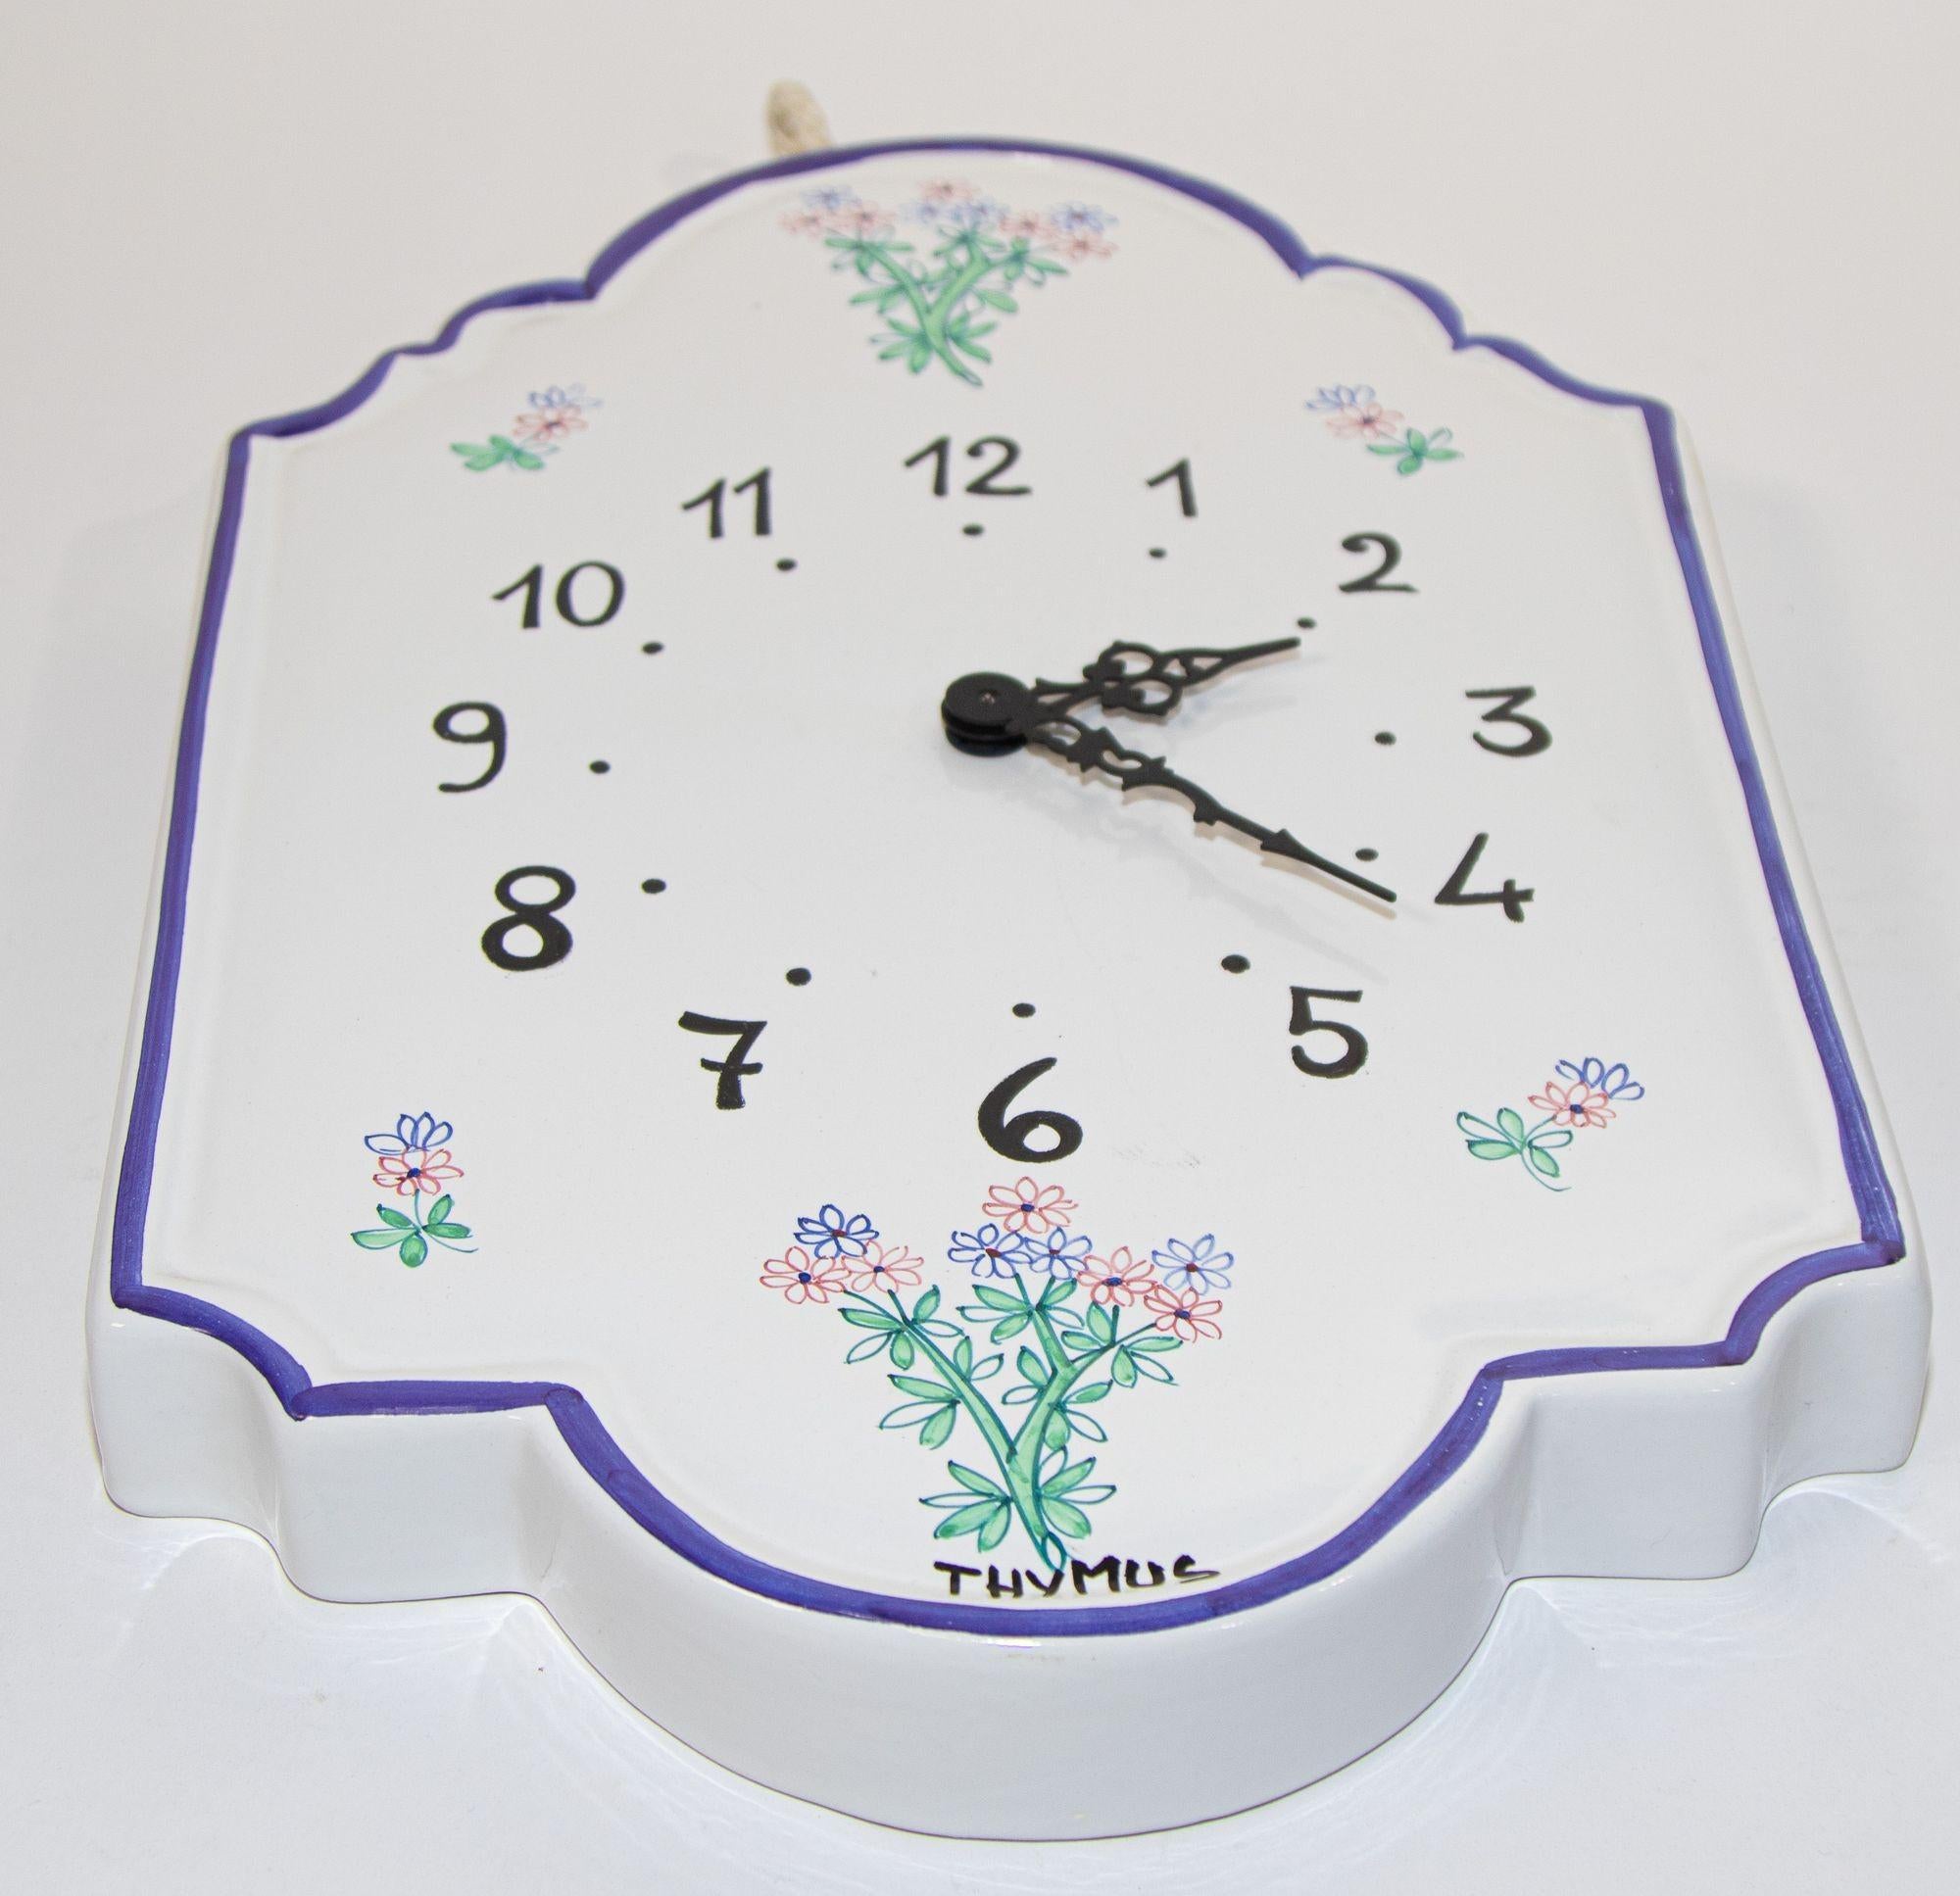 20th Century Hand Painted Ceramic Wall Clock with Thymus Design, Italy